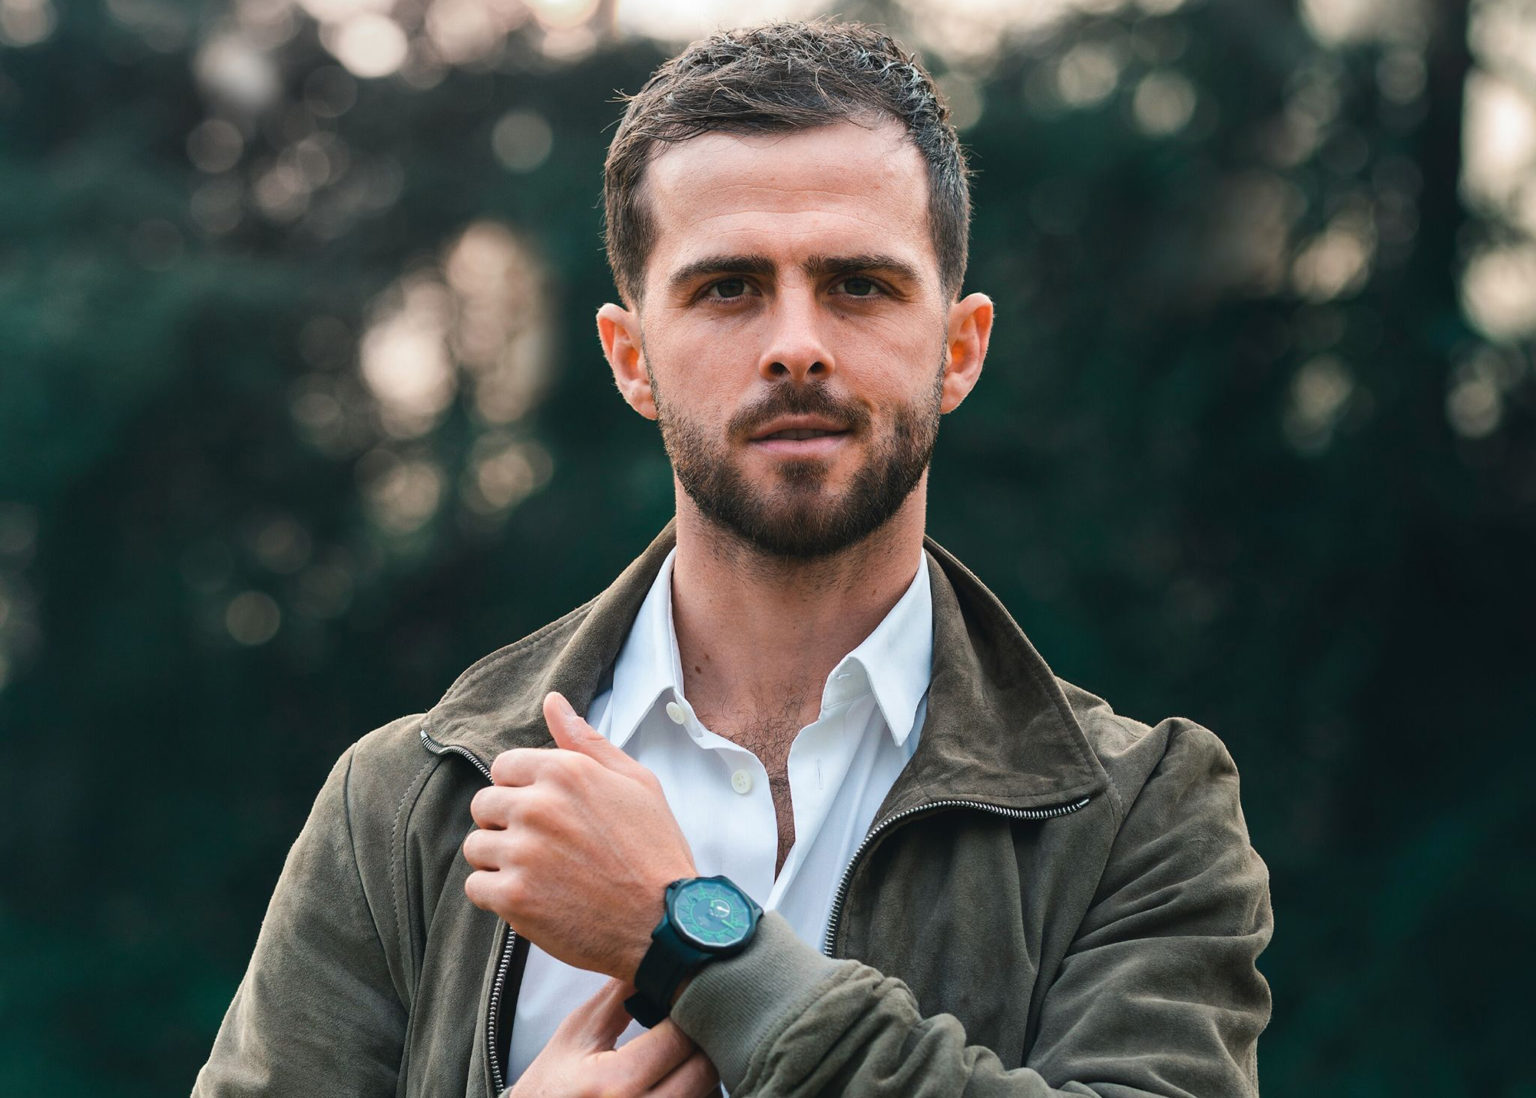 The first Limited Edition dedicated to Miralem Pjanić